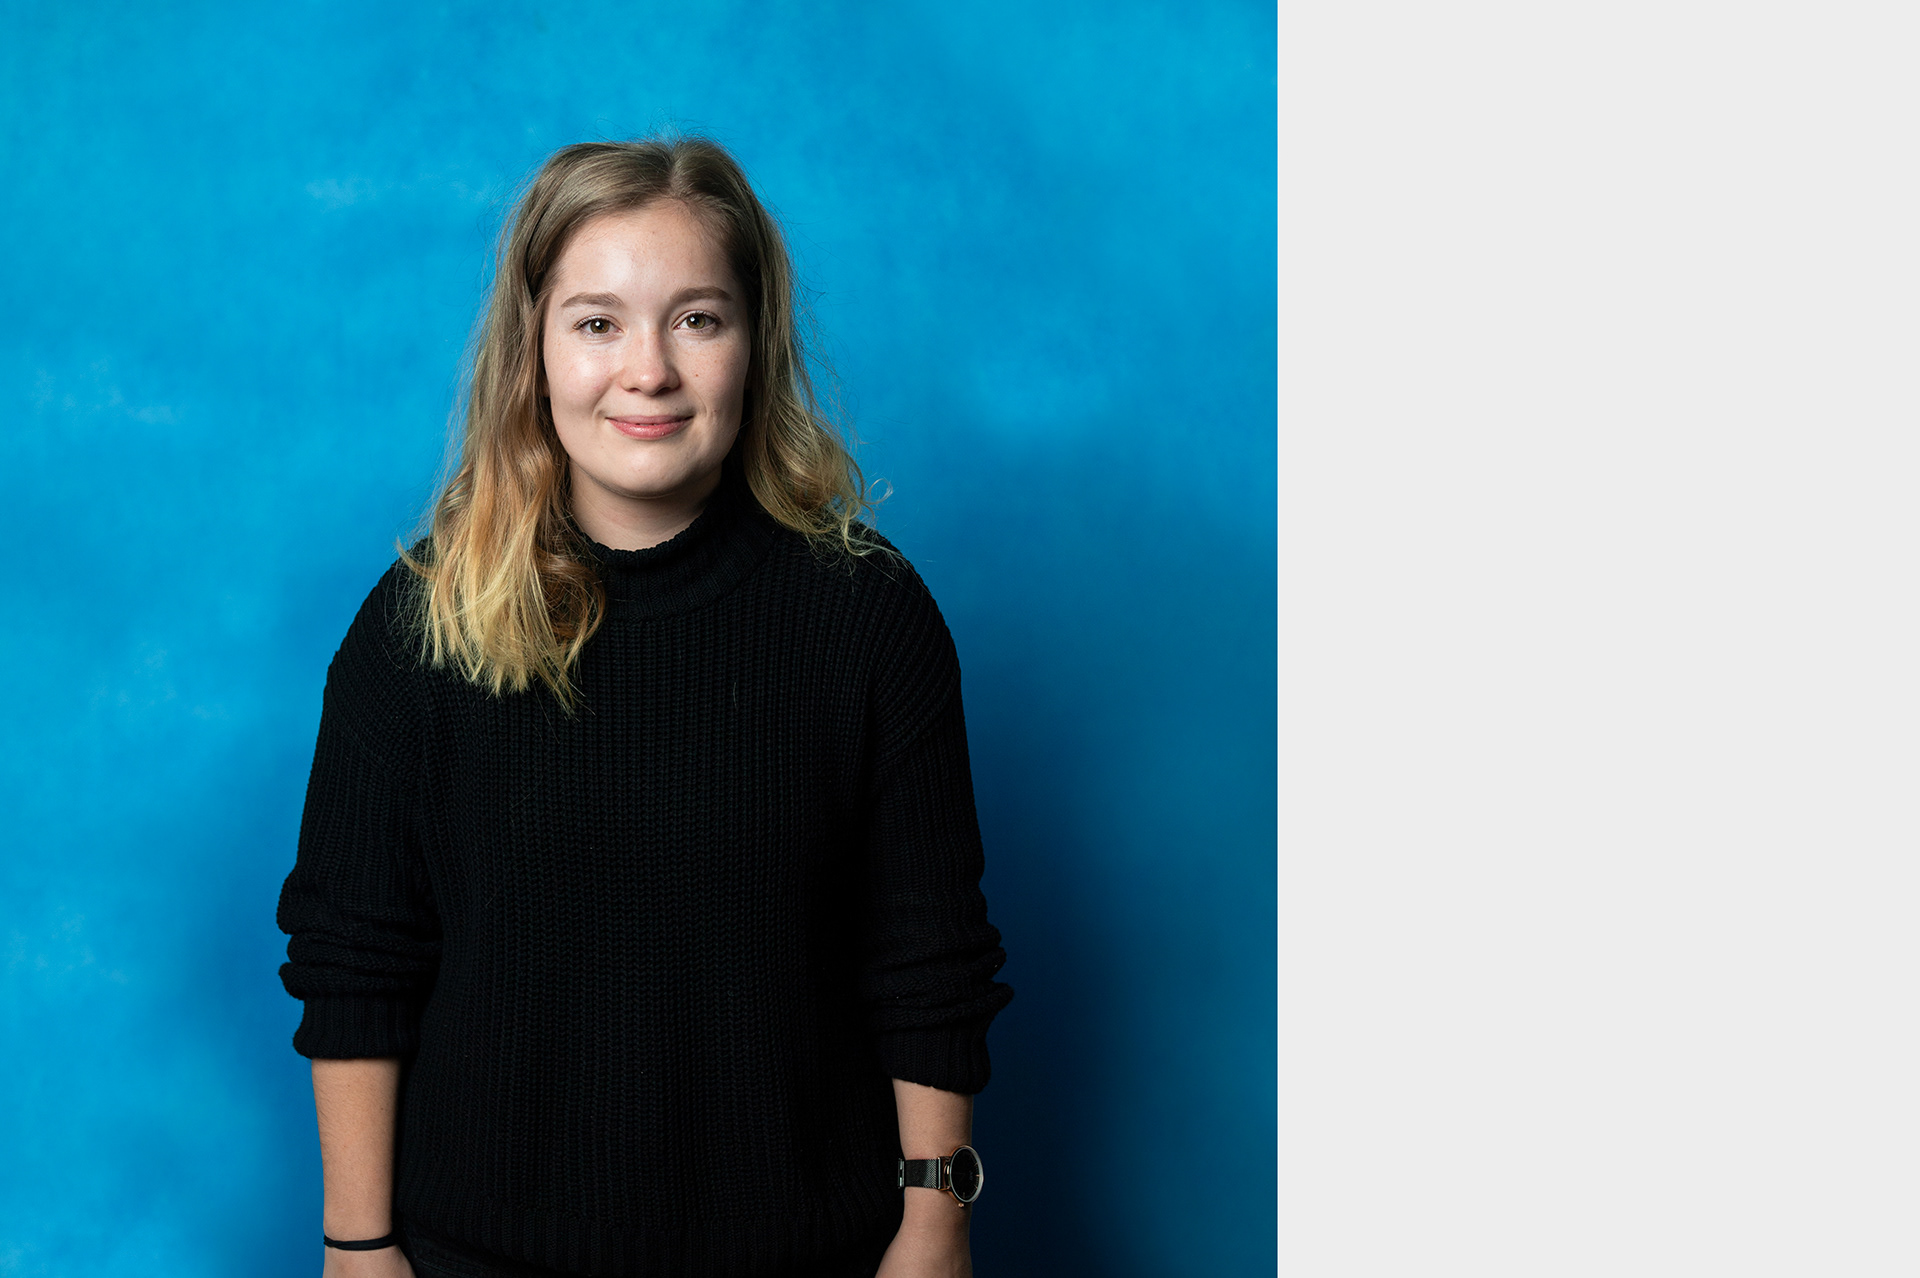 Jana, studio portrait of young female volunteer in front of blue background